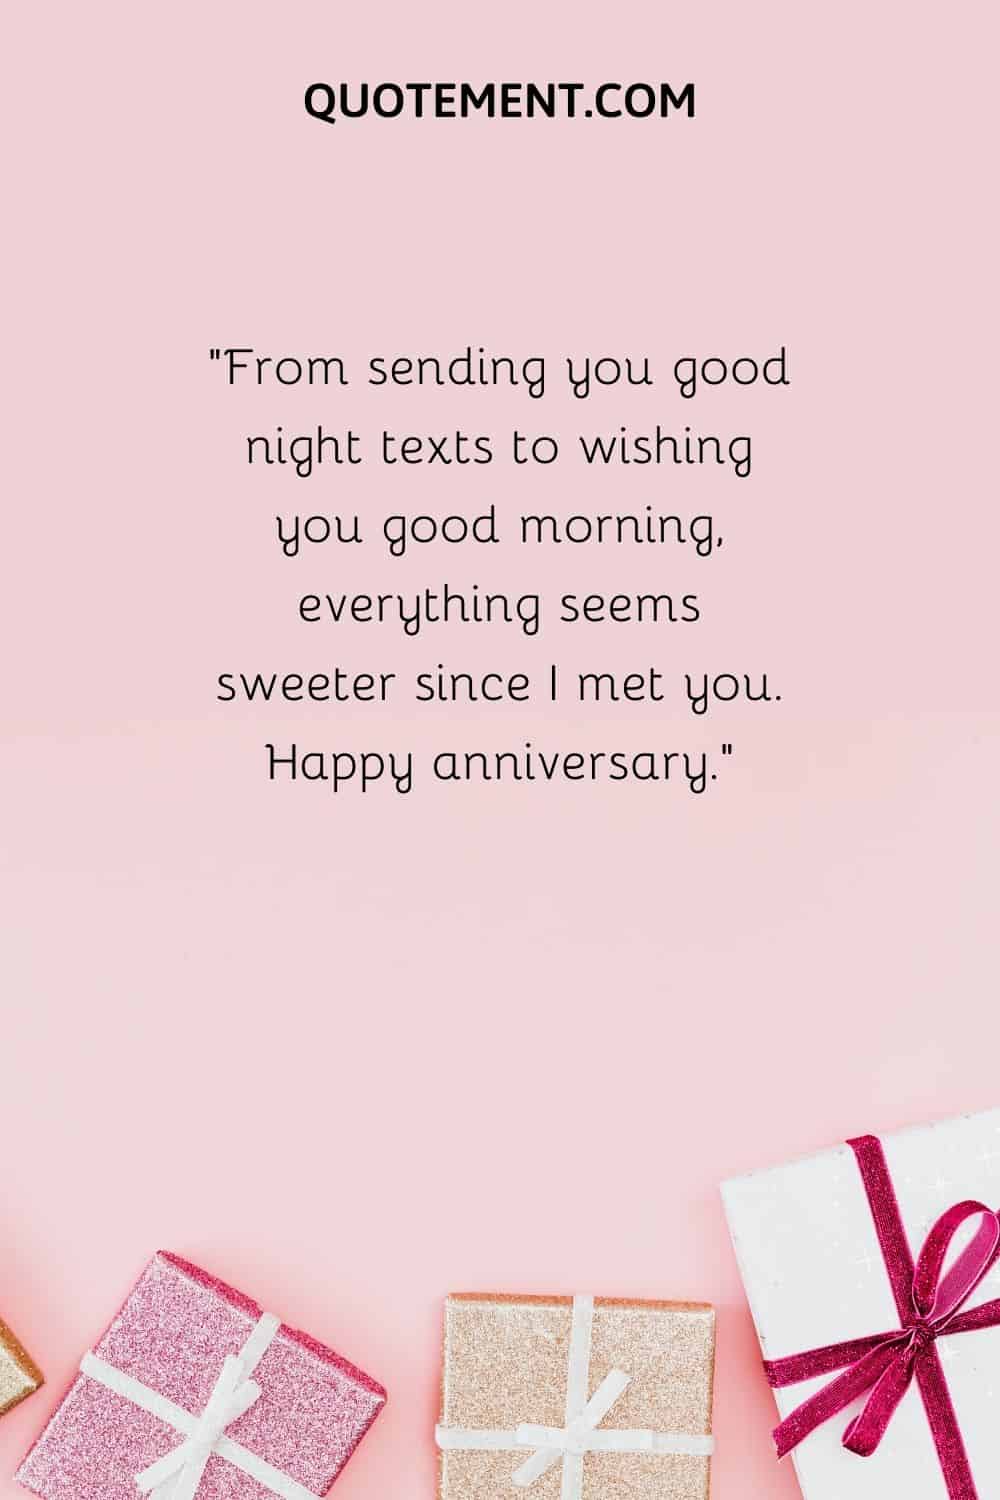 From sending you good night texts to wishing you good morning, everything seems sweeter since I met you.